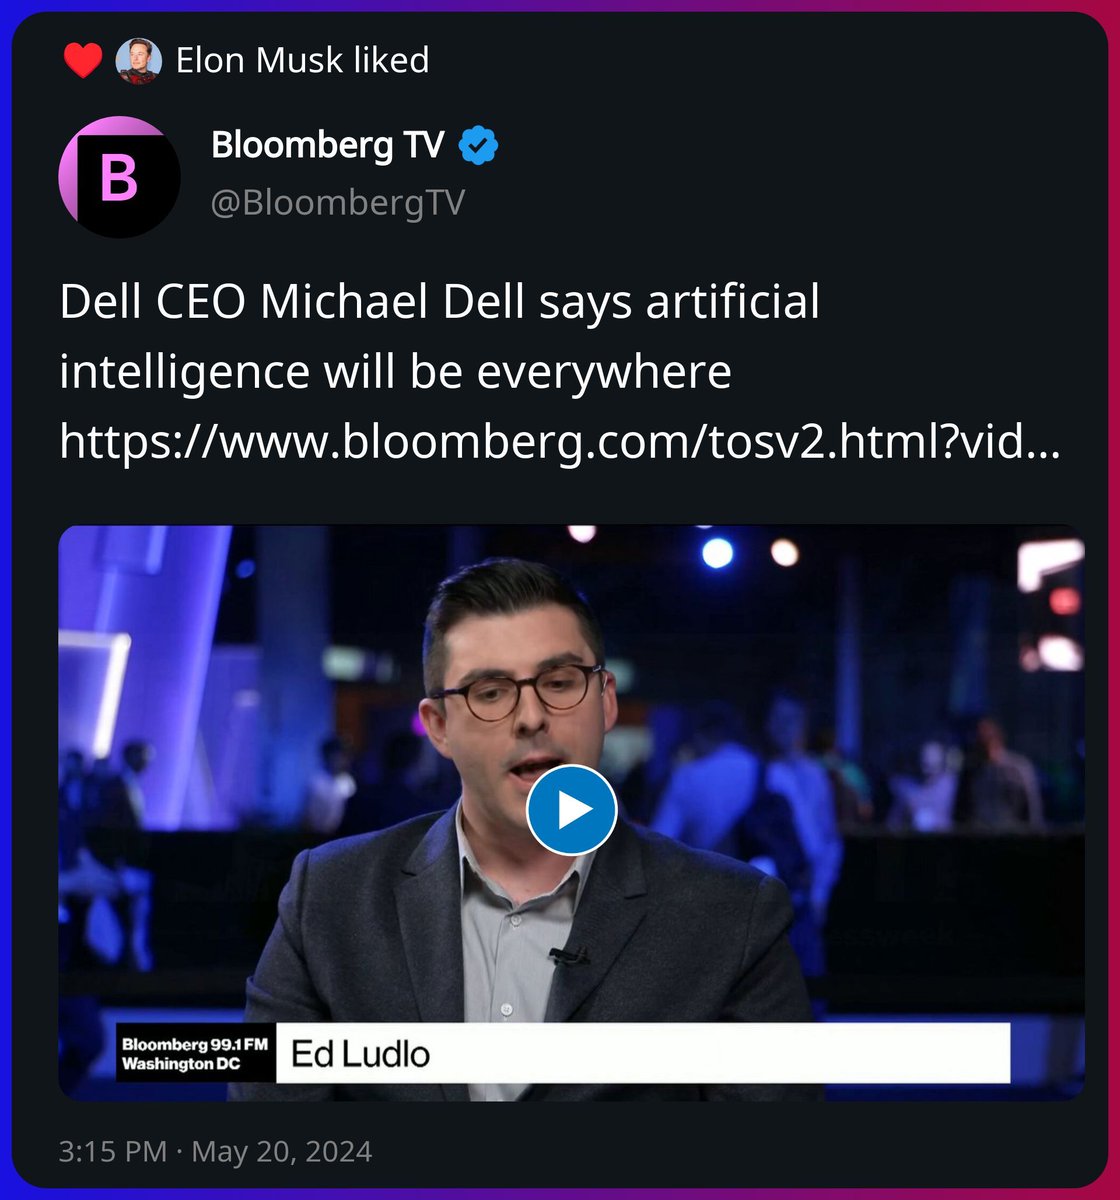 Elon Musk liked a post from Bloomberg TV x.com/BloombergTV/st…